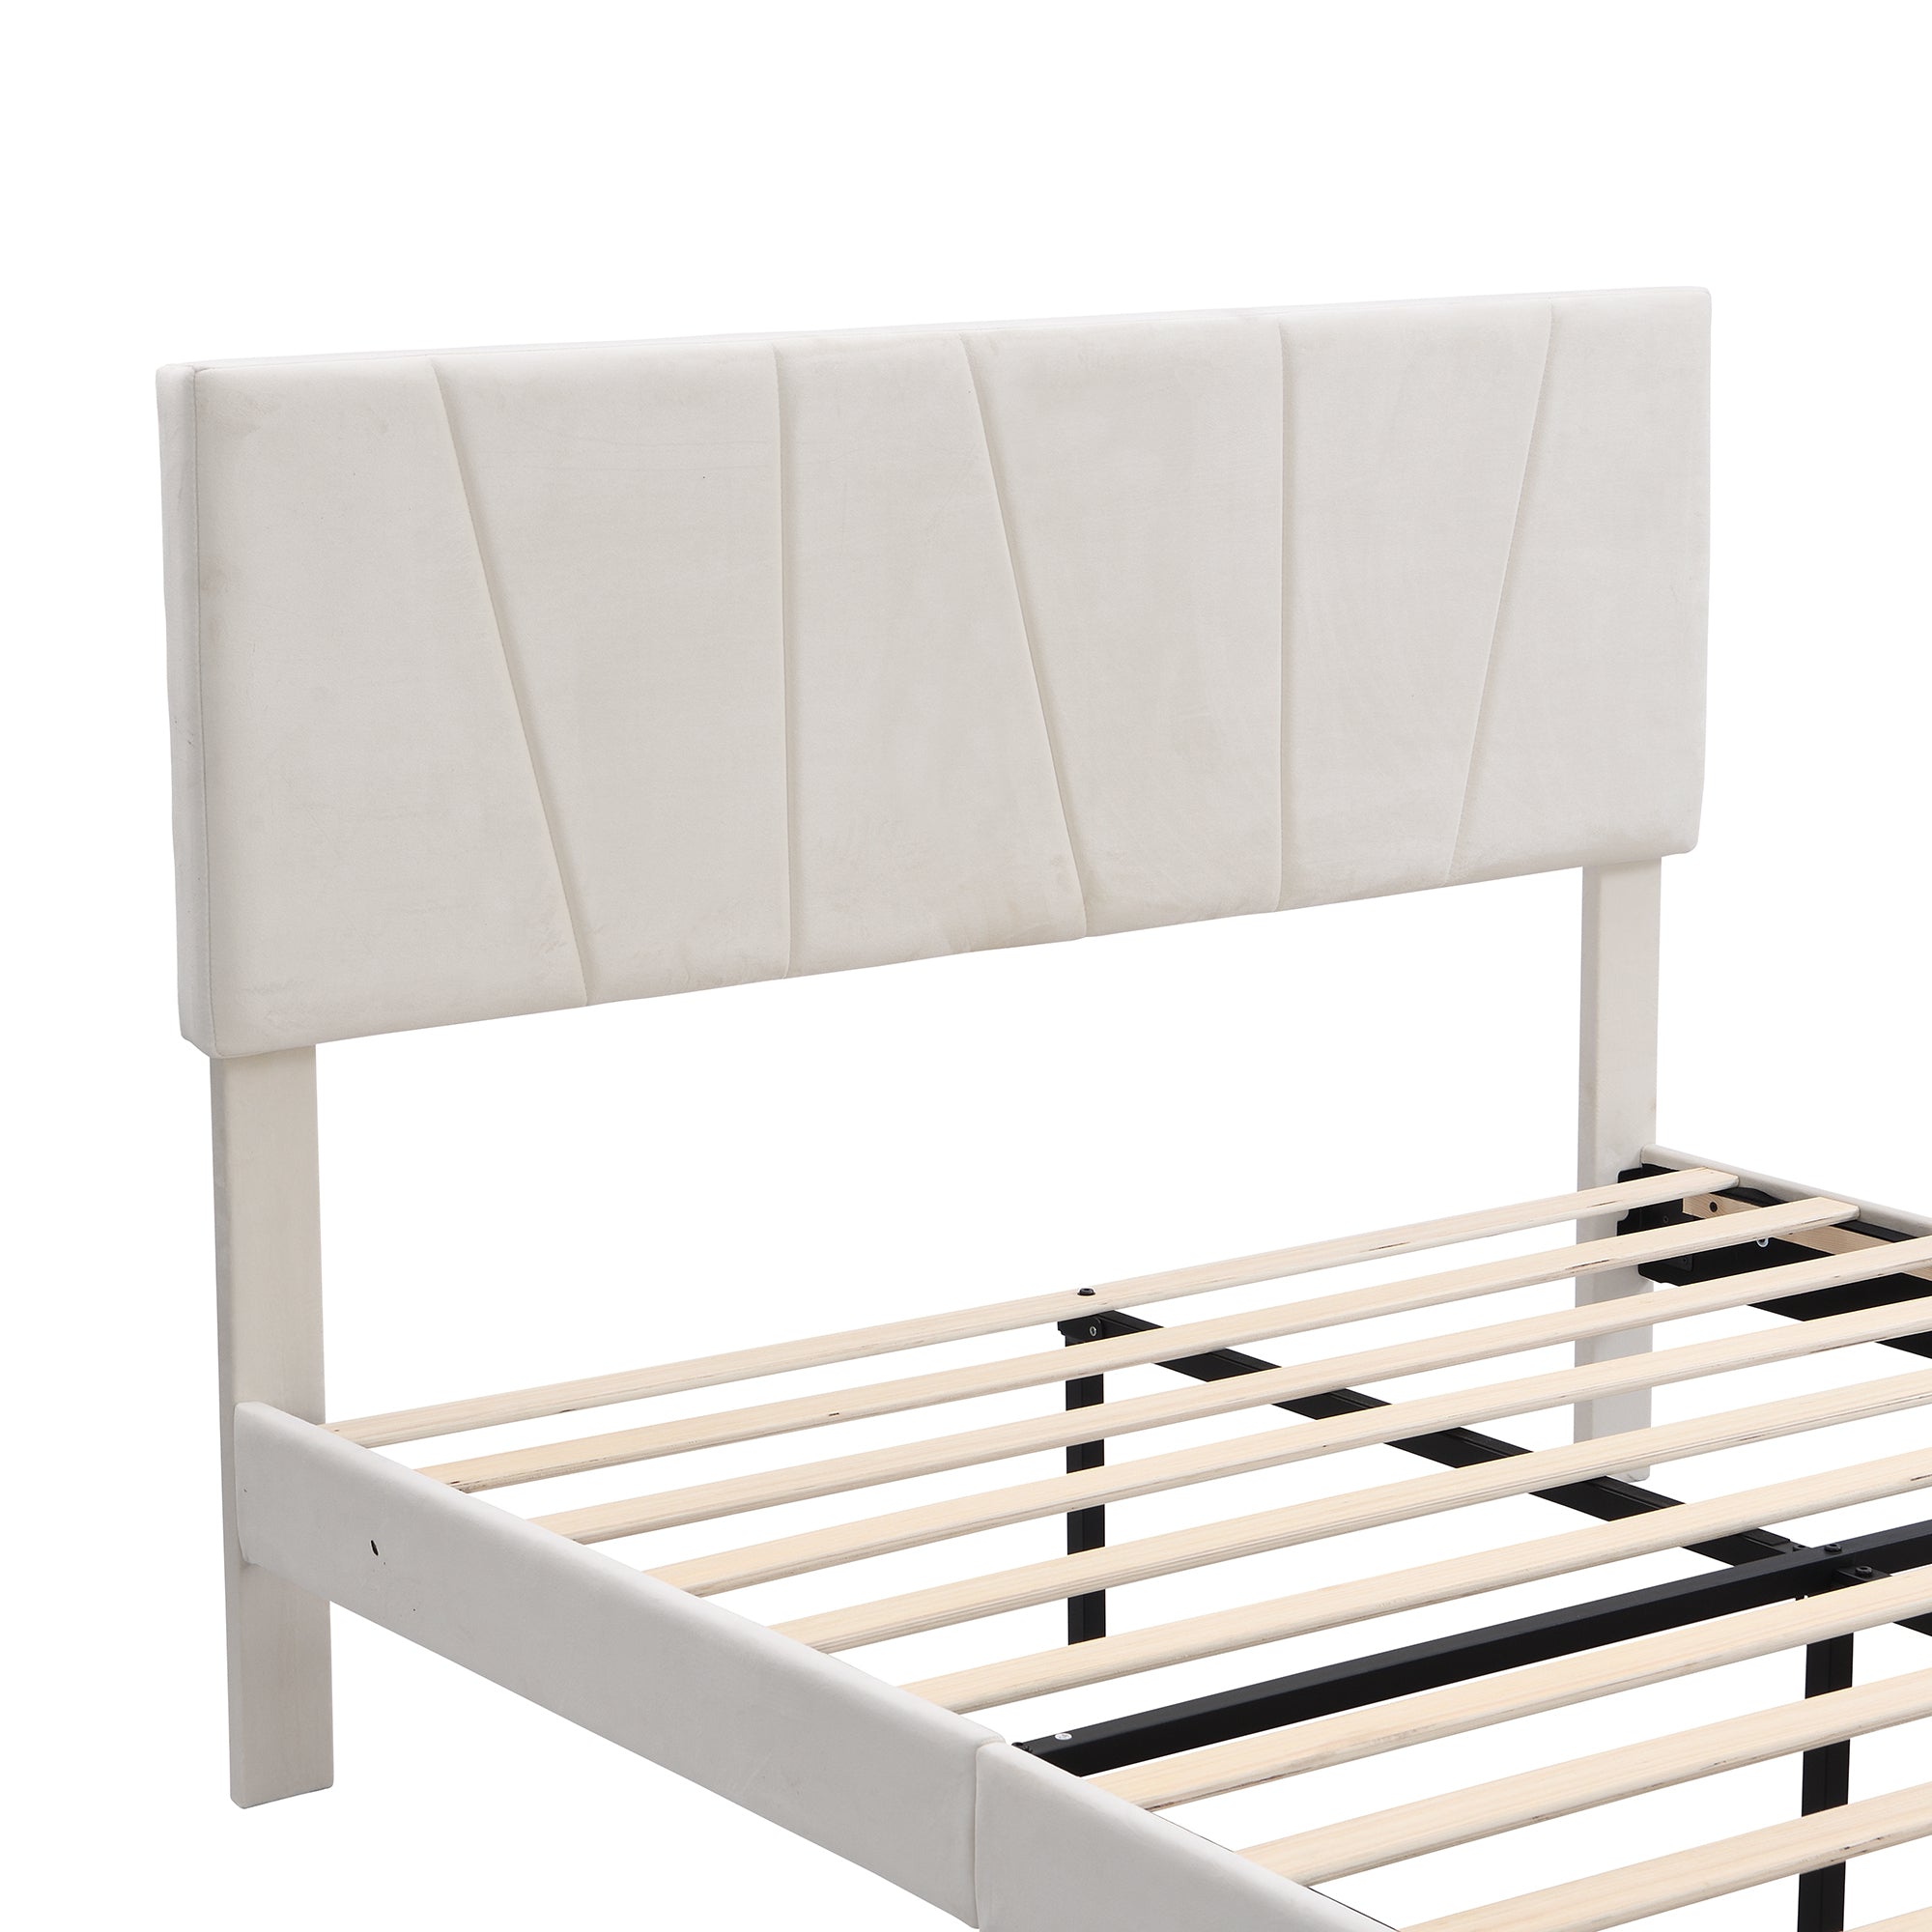 Queen Size Upholstery Platform Bed with One Drawer, Adjustable Headboard - Beige